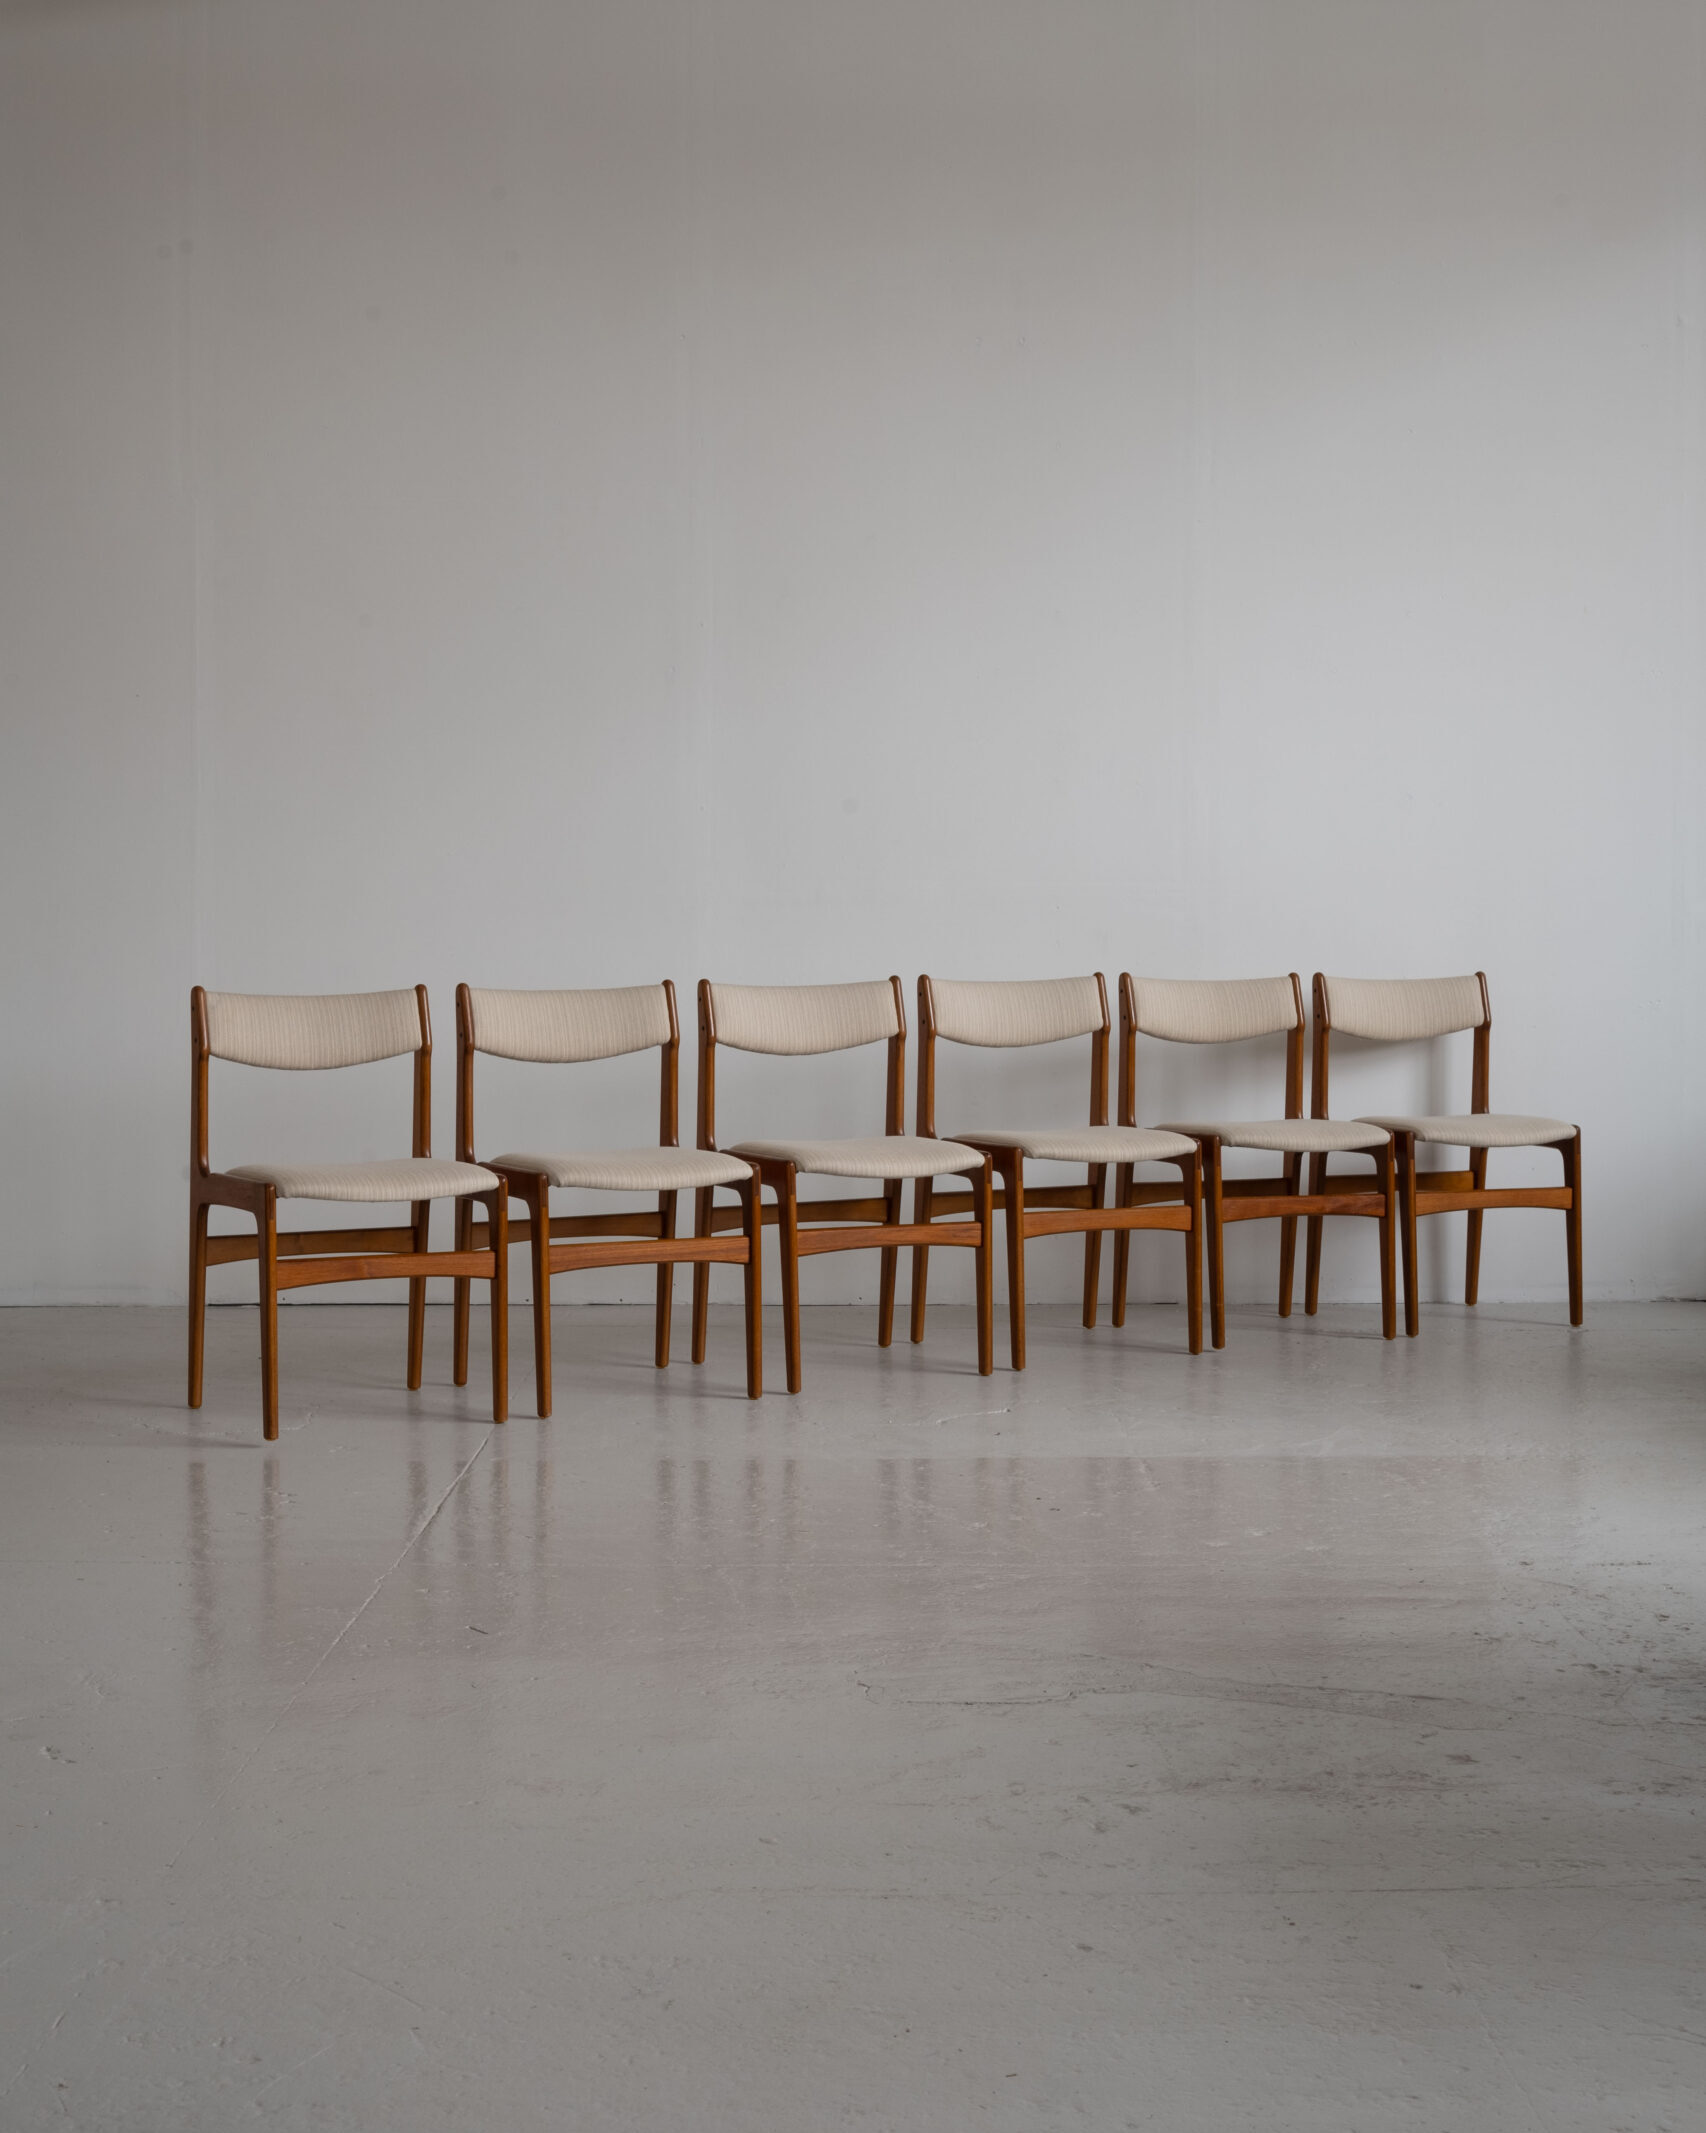 Anderstup teak dining chairs (1960s)